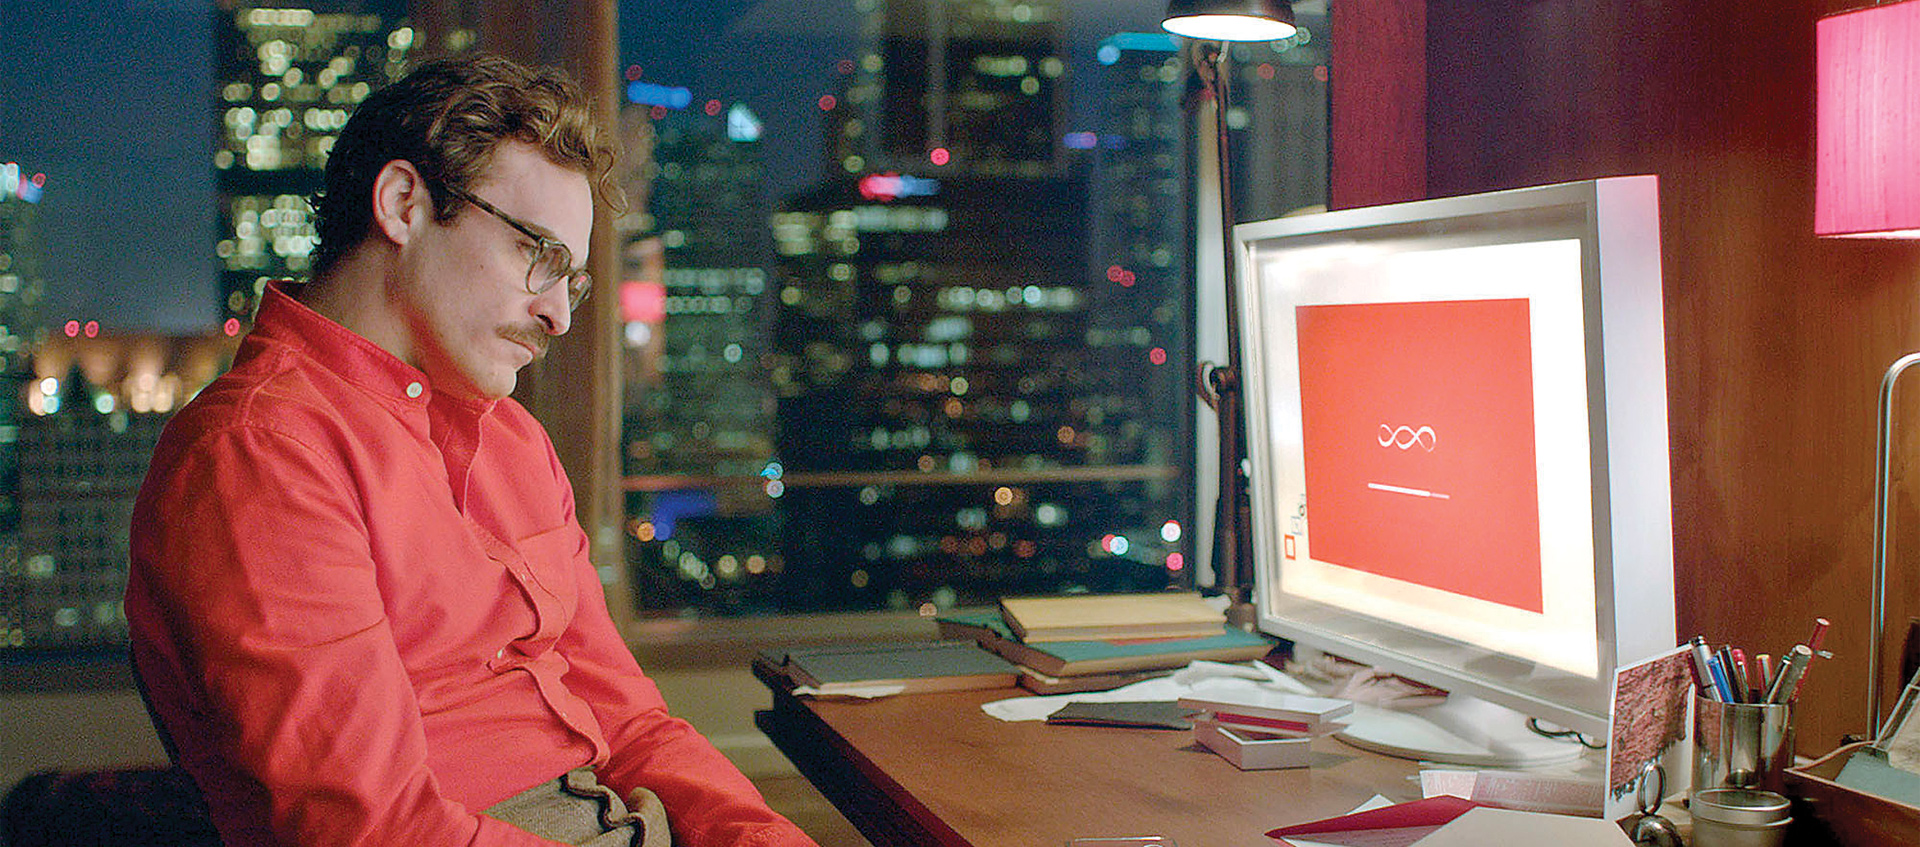 a man in a red shir looking at computer computer screen in an office